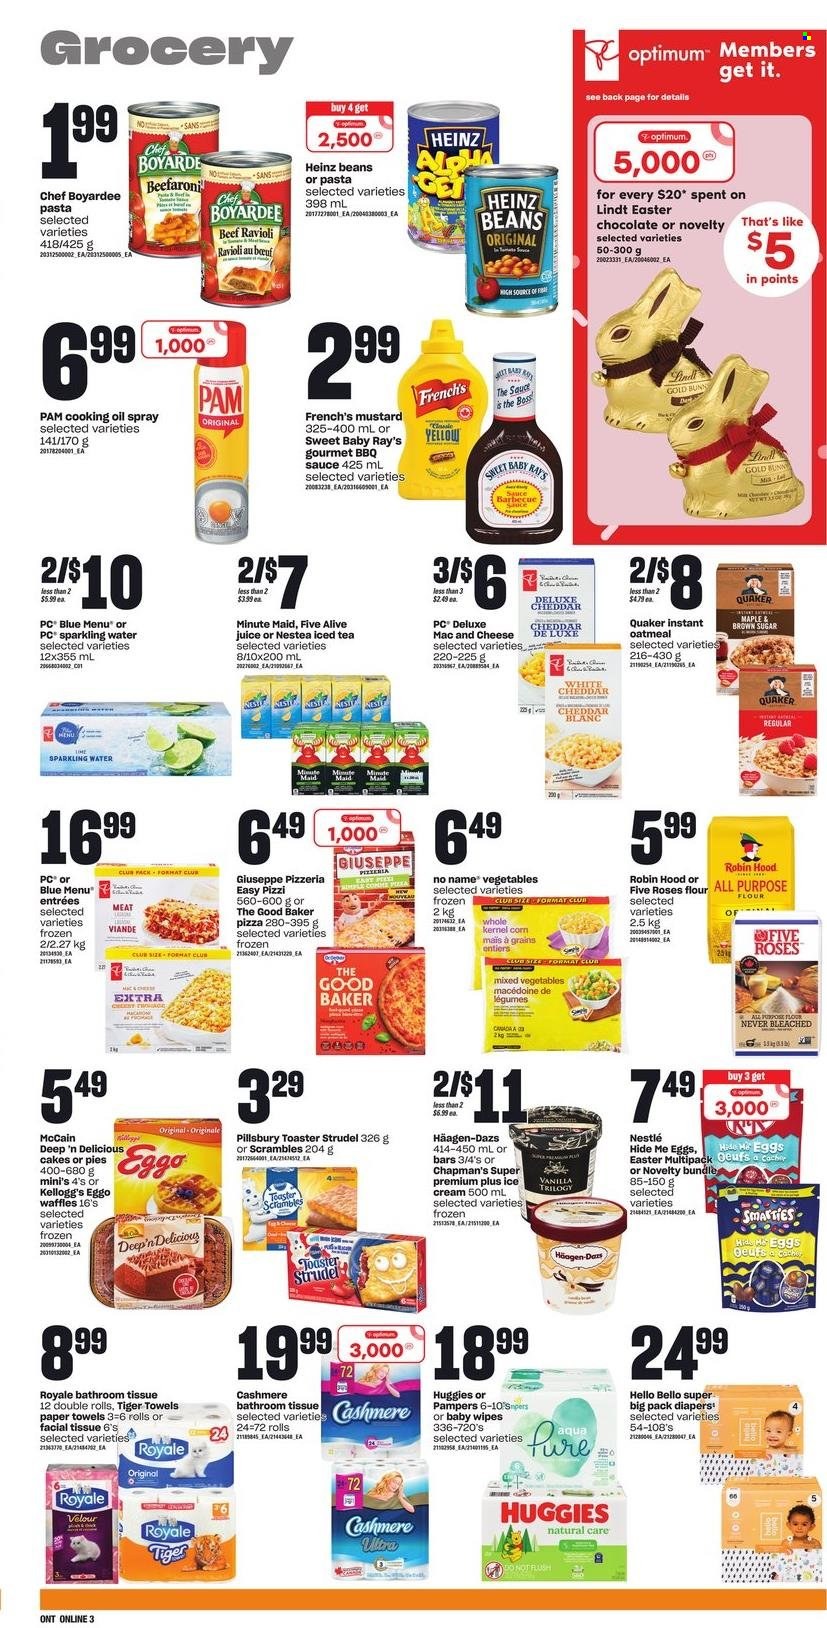 thumbnail - Zehrs Flyer - March 16, 2023 - March 22, 2023 - Sales products - cake, strudel, waffles, beans, No Name, macaroni & cheese, ravioli, pizza, sauce, Pillsbury, Quaker, cheddar, eggs, ice cream, Häagen-Dazs, mixed vegetables, McCain, Kellogg's, all purpose flour, cane sugar, flour, oatmeal, Chef Boyardee, BBQ sauce, mustard, oil, cooking oil, switch, juice, ice tea, fruit punch, sparkling water, water, wipes, Pampers, baby wipes, nappies, bath tissue, kitchen towels, paper towels, Optimum, Nestlé, Heinz, Huggies, Lindt, Smarties. Page 6.